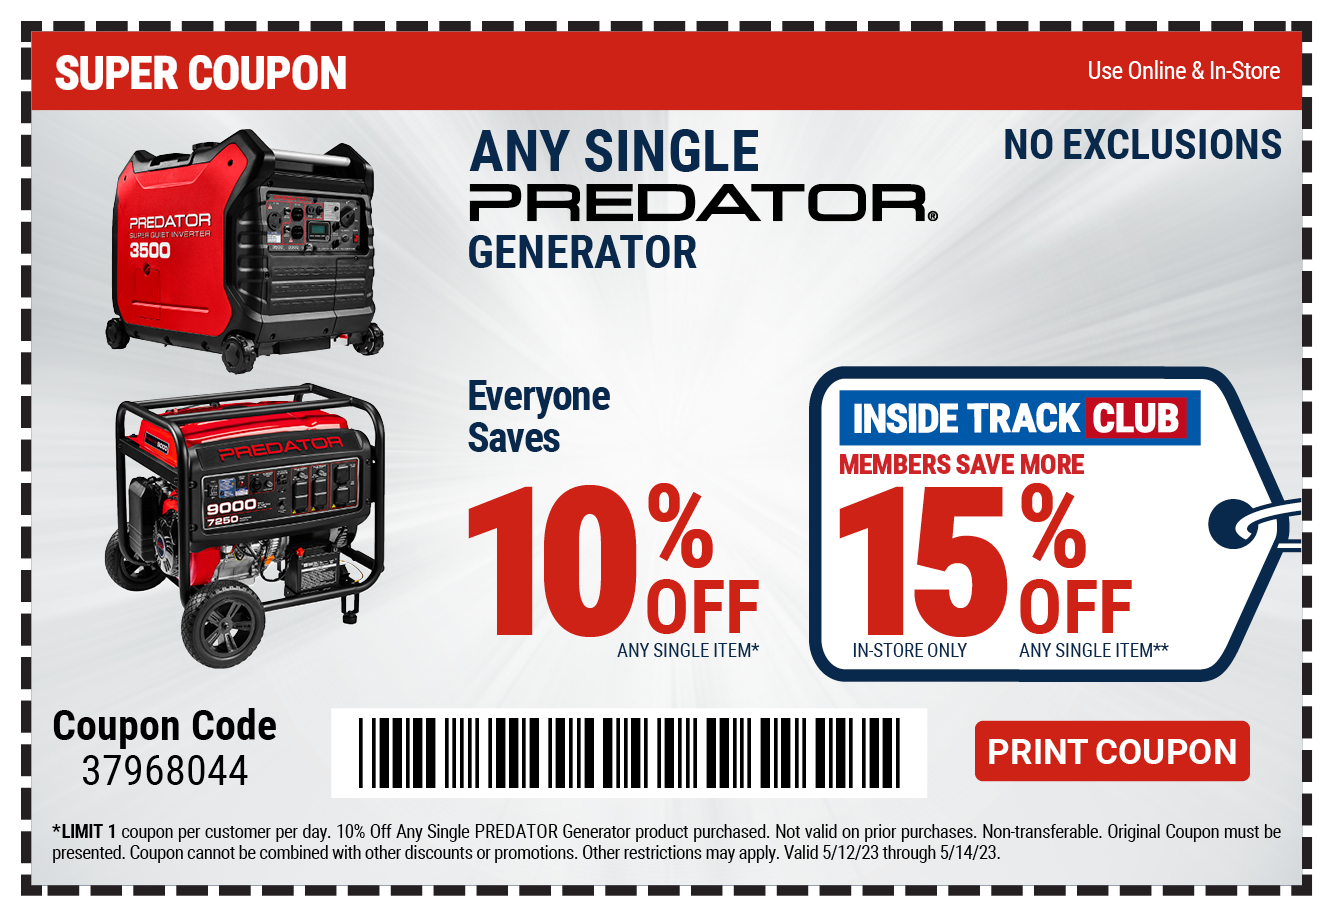 NHCPS Coupon Codes & Discounts [Save up to $352.9 Today]